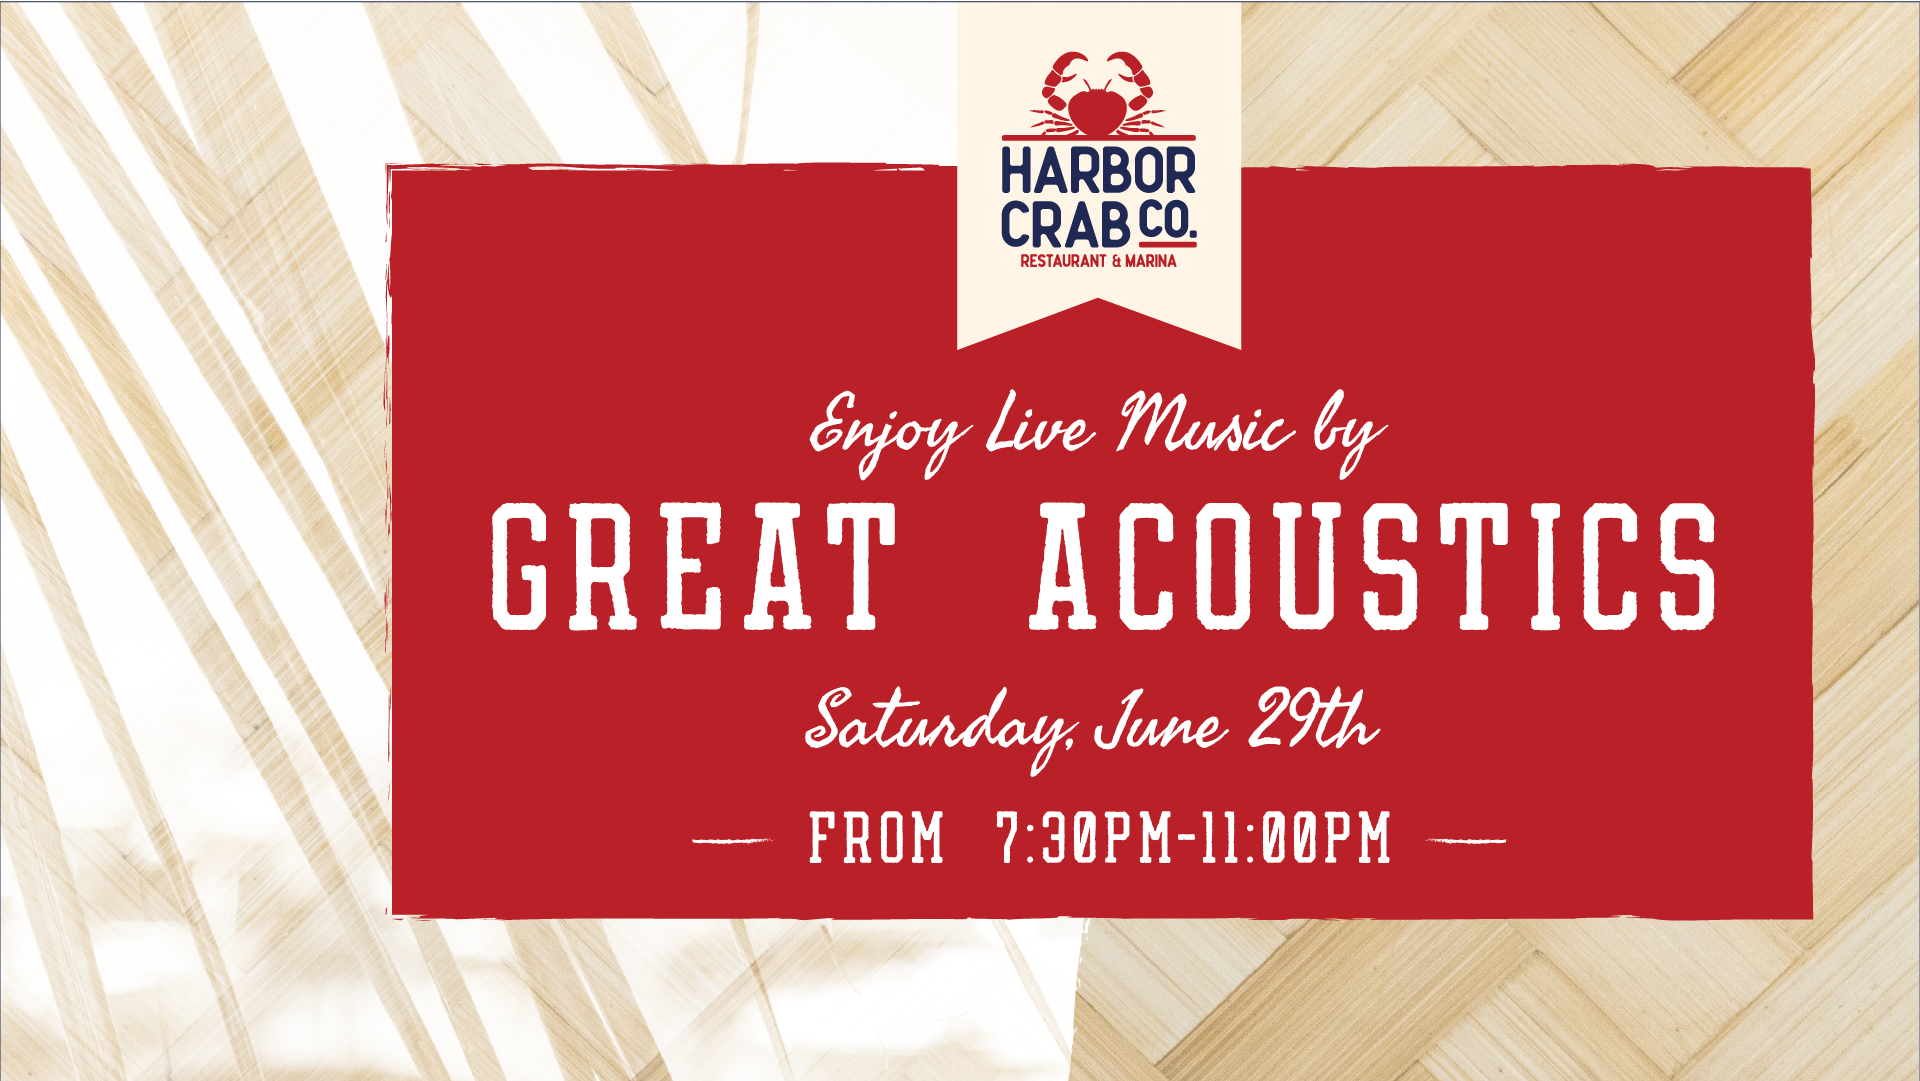 Live music by Great Acoustics at Harbor Crab on June 29th from 7:30pm-11pm.